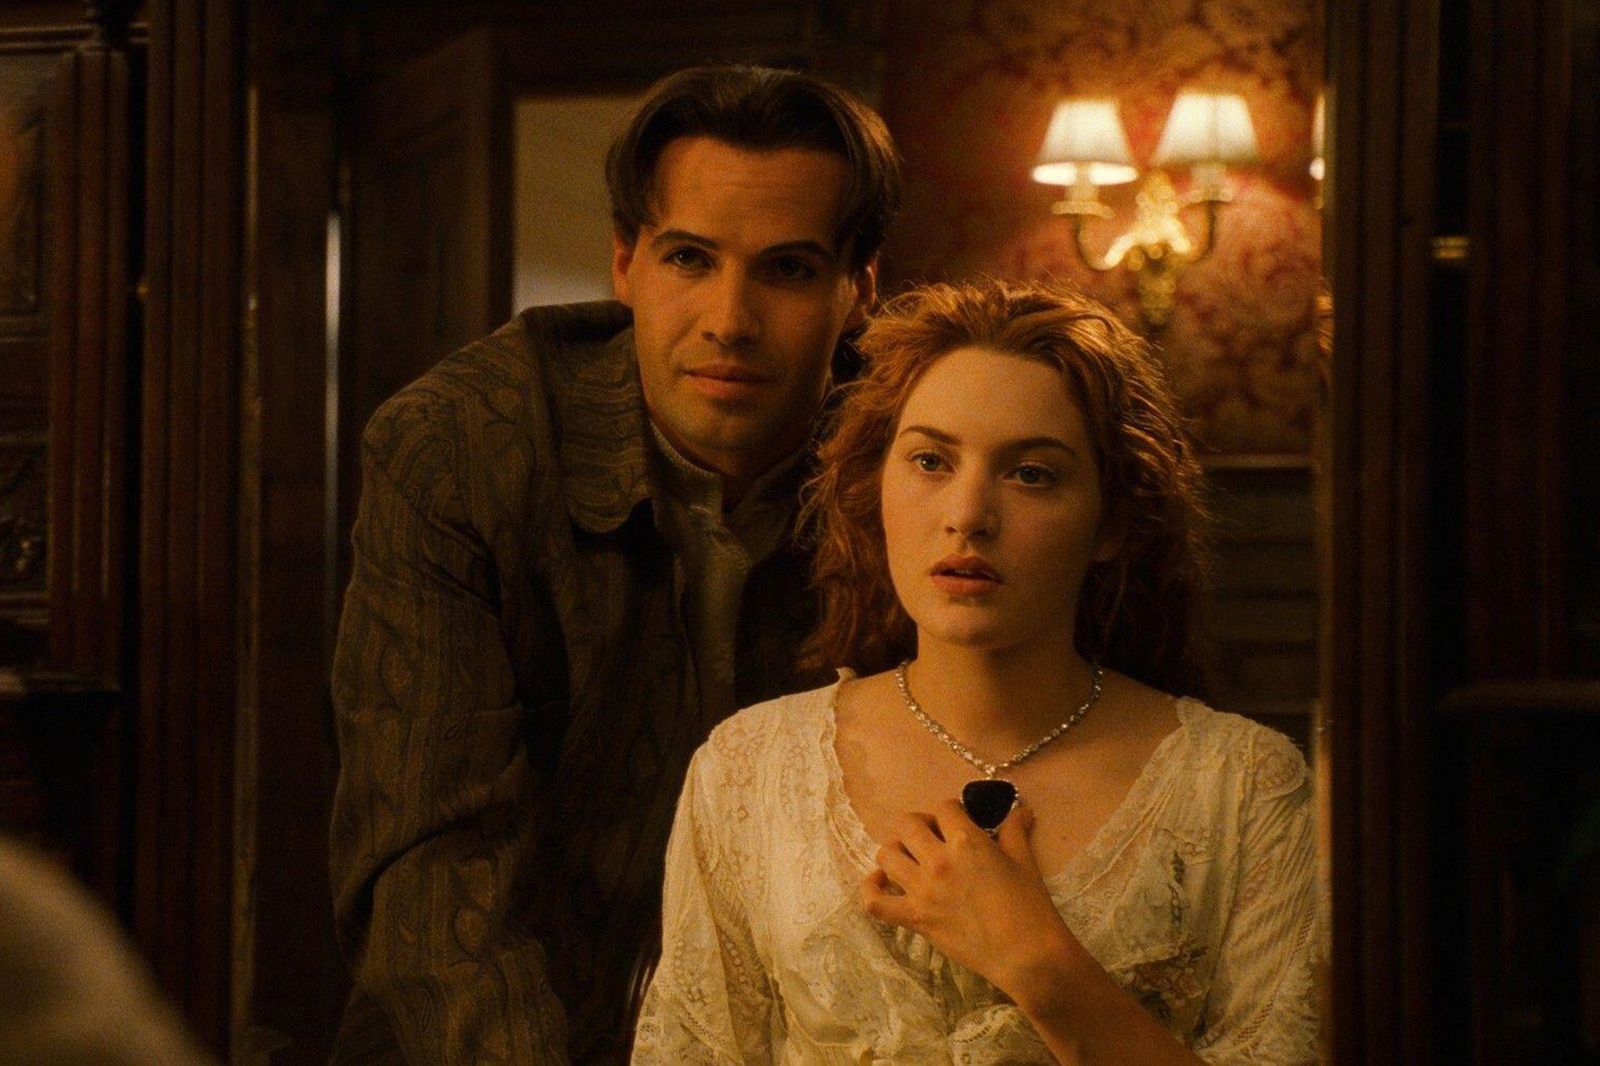 Billy Zane and Kate Winslet in “Titanic,” which turned the fictional “Heart of the Ocean” into one of the most recognizable pieces of jewelry in the world.